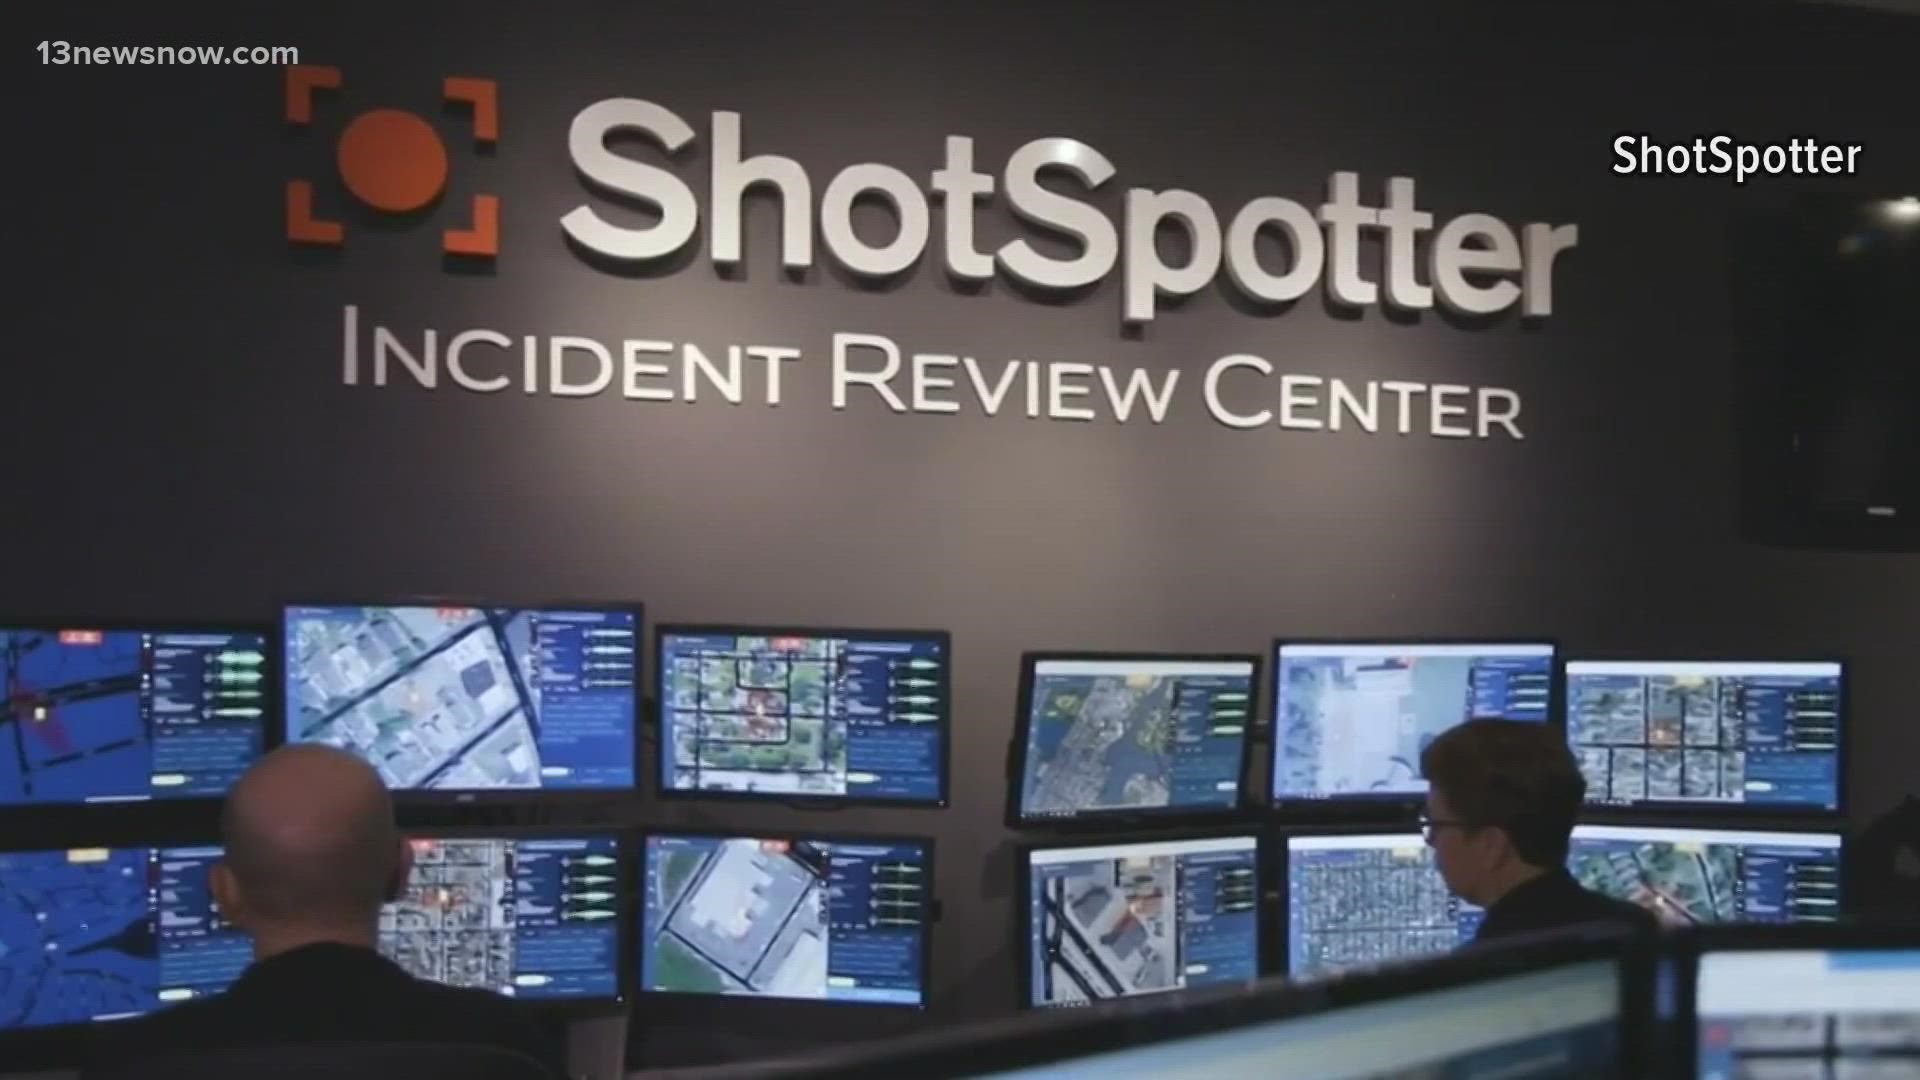 Virginia Beach Police Department sent letters to the communities notifying them that they would begin using ShotSpotter. It's created to detect gunshots.